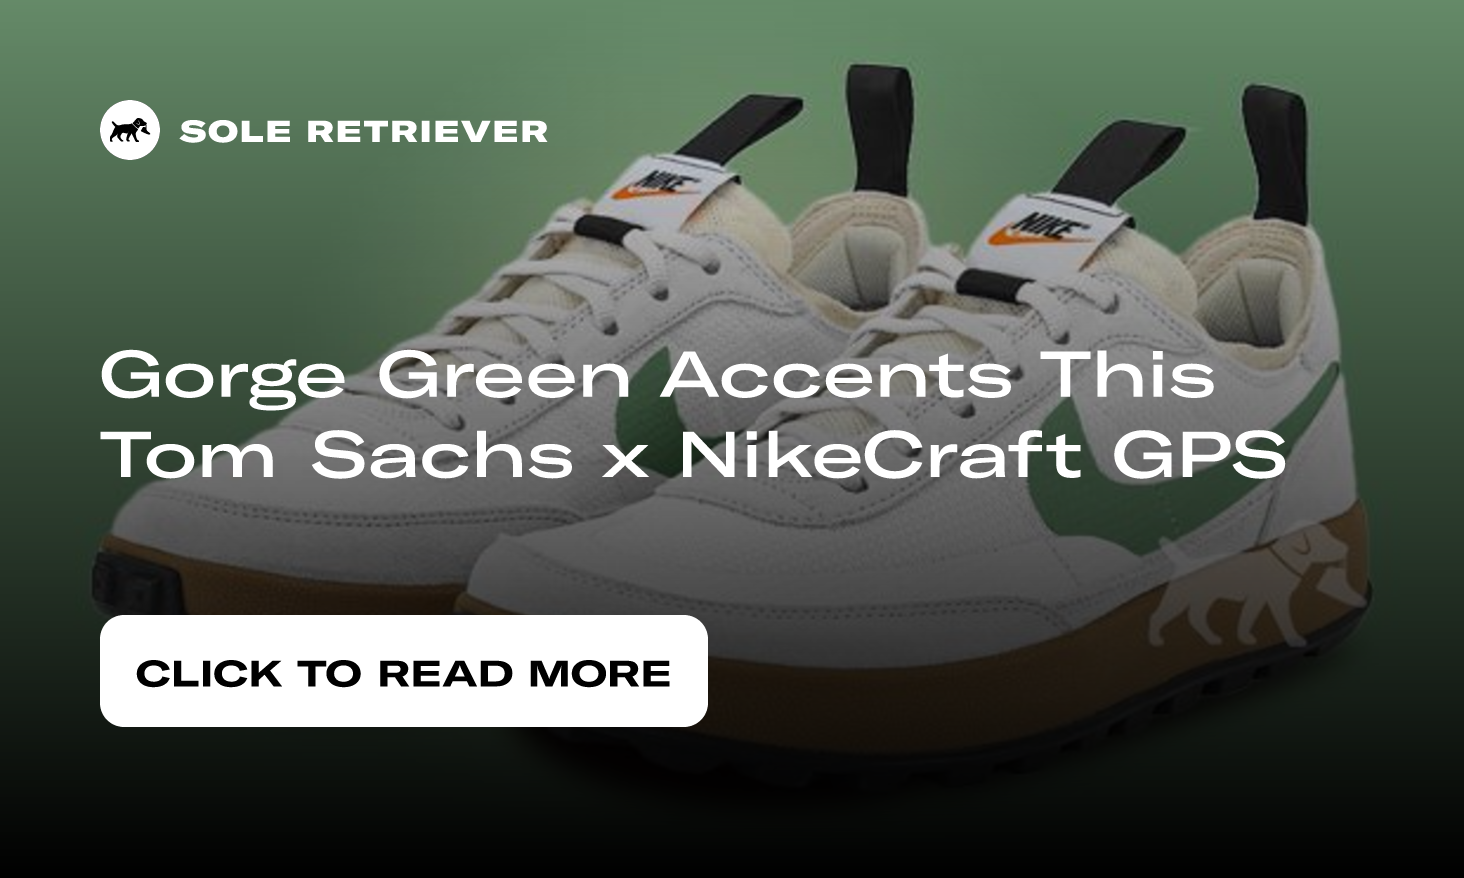 Your Local Kohls May Have Pairs Of Tom Sachs x NikeCraft General Purpose  Shoe - Sneaker News